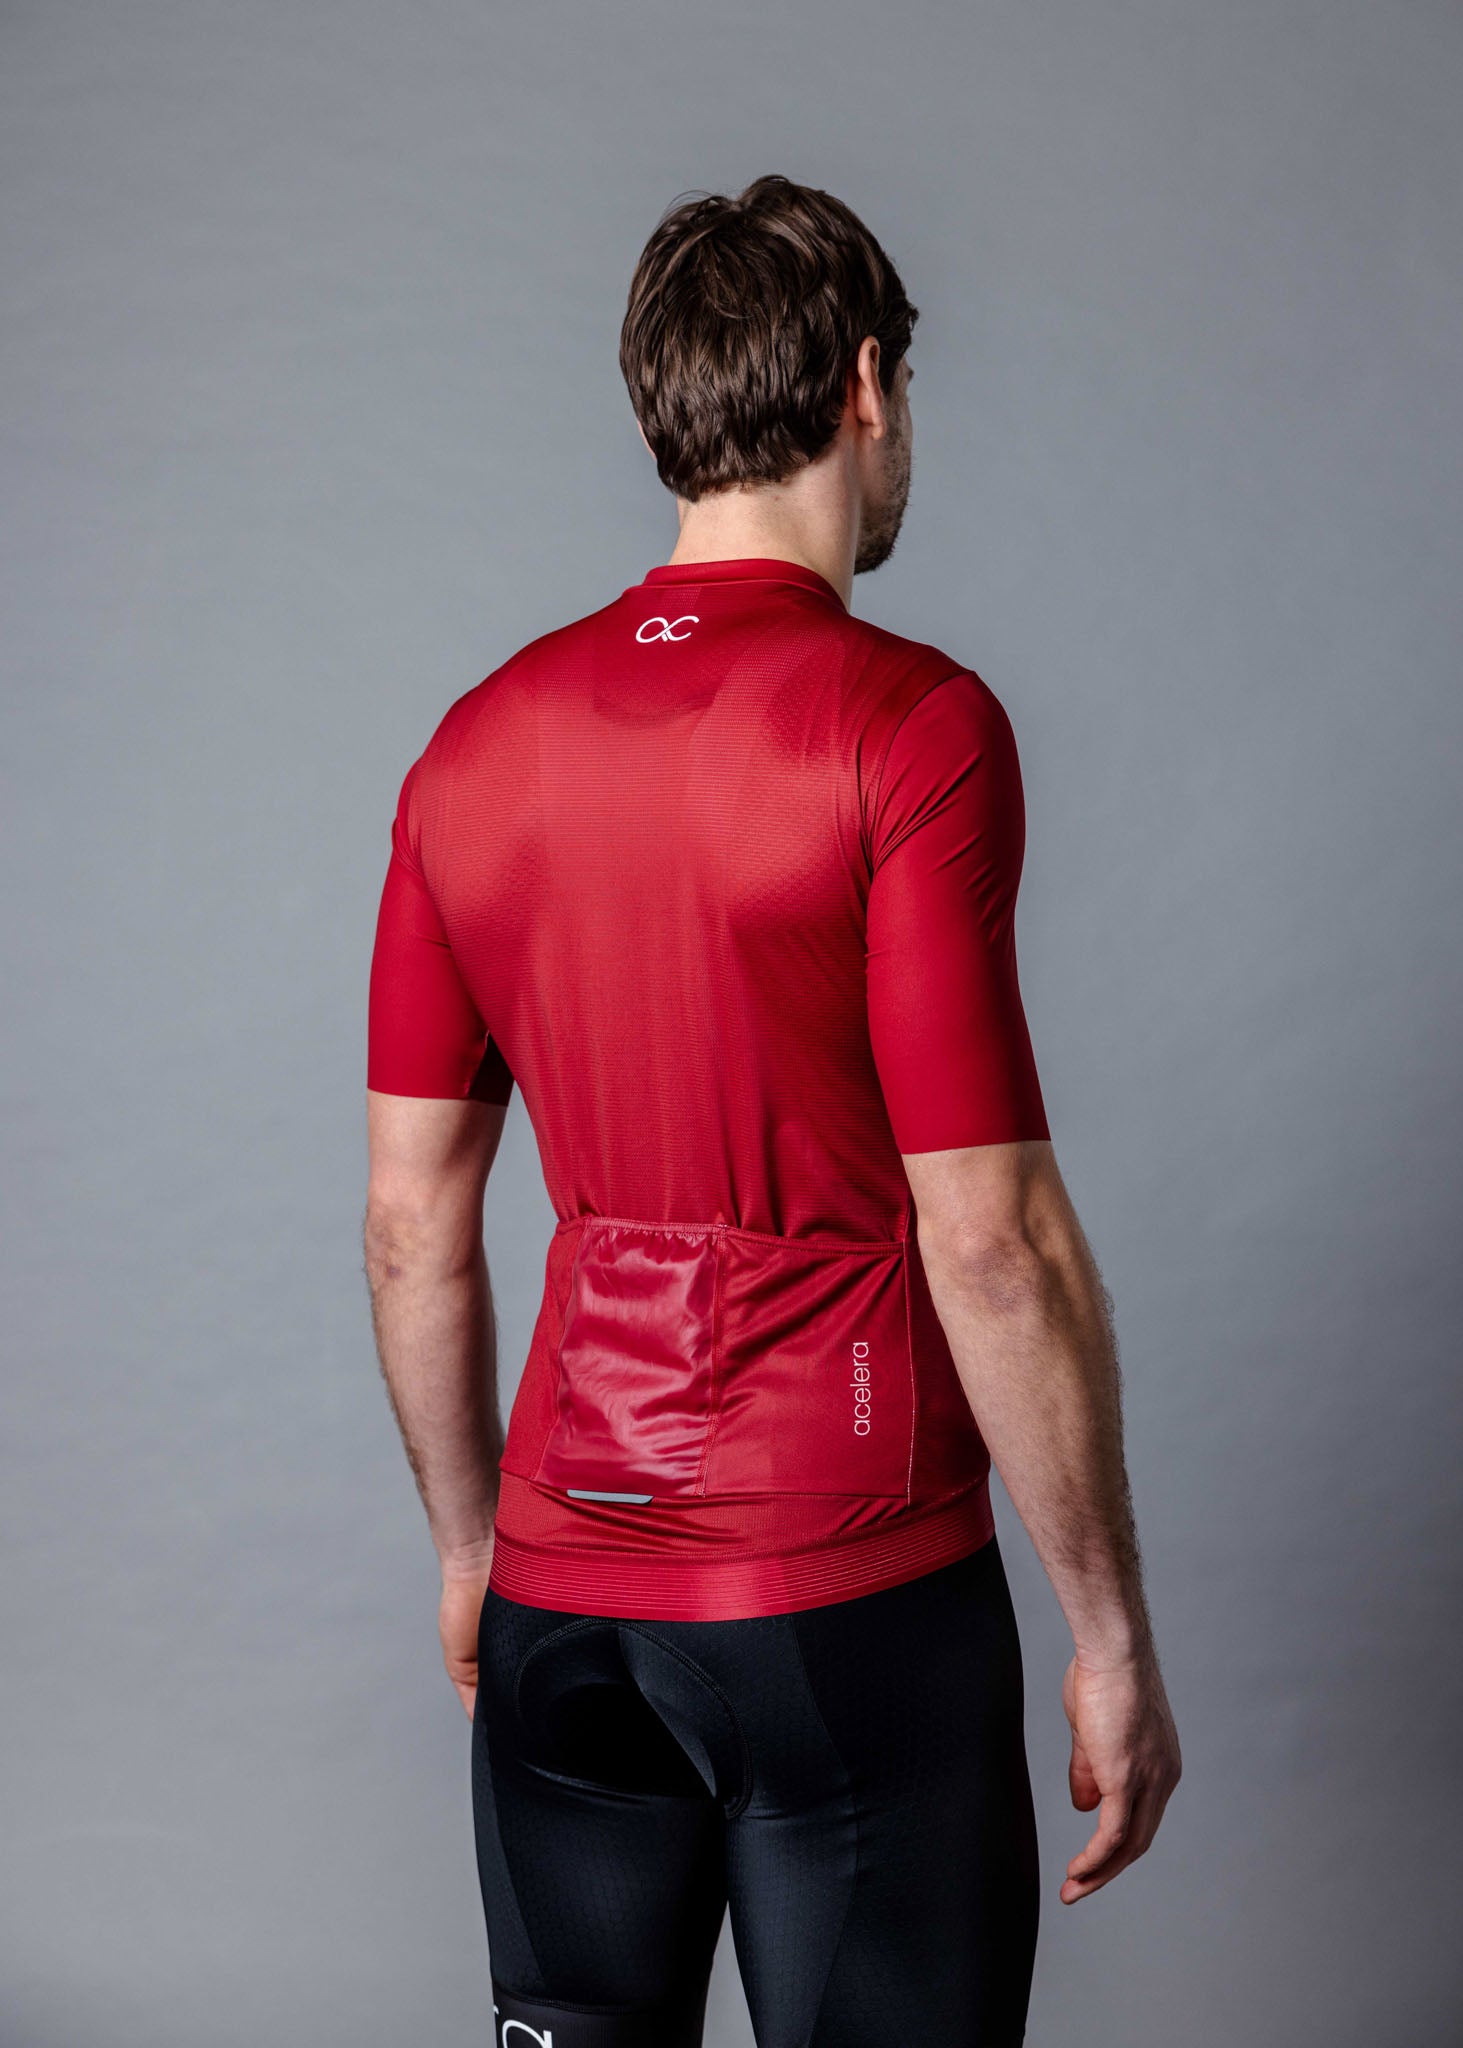 Professional Cycling Jersey Red short sleeve